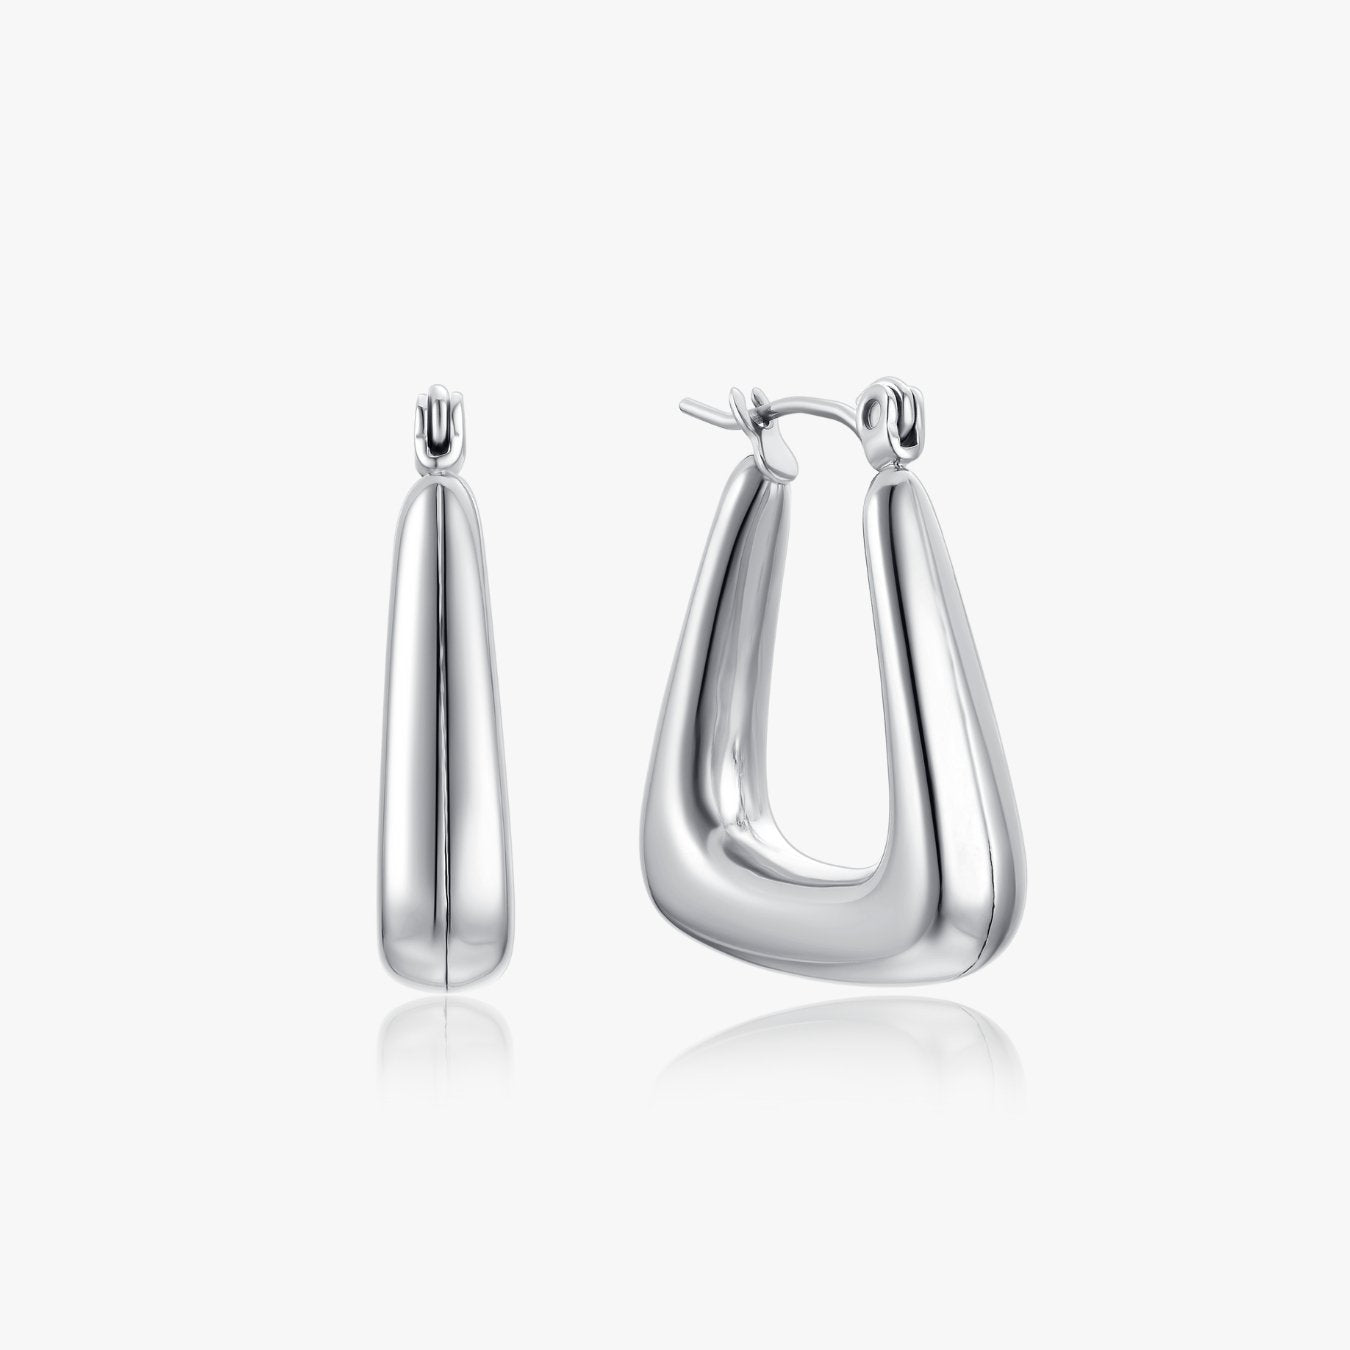 The Delta Hollow Earrings in Silver - Flaire & Co.